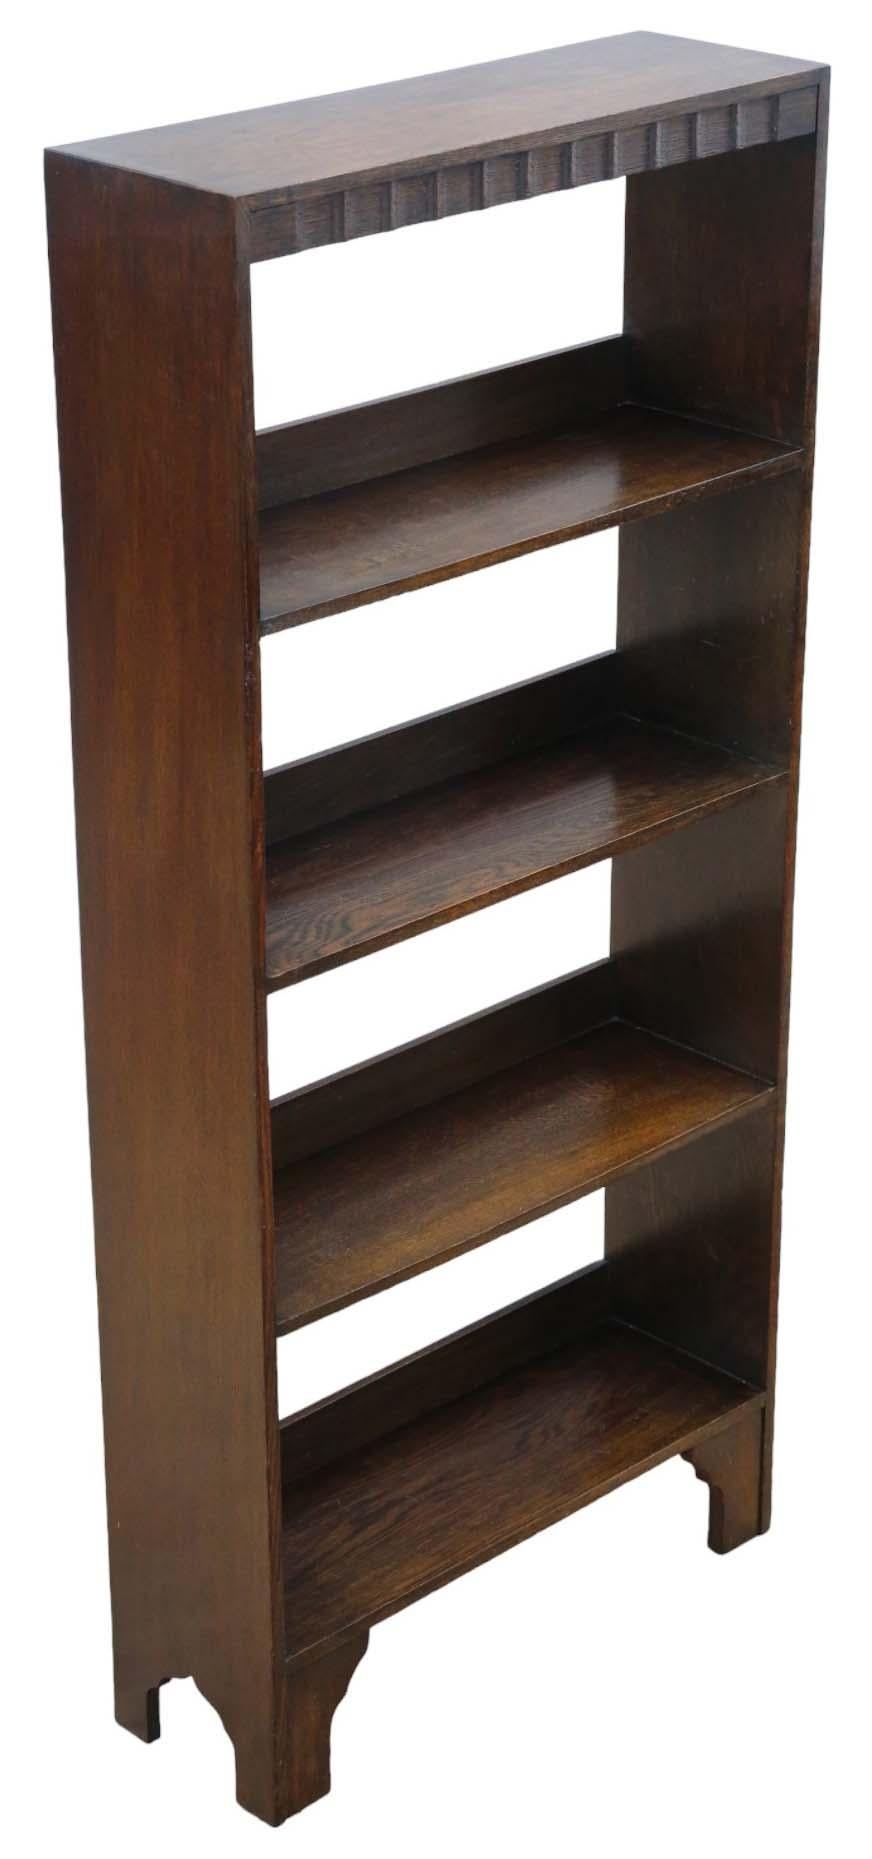 Art Deco Antique Oak Bookcase Display Cabinet - Quality C1920 Piece In Good Condition For Sale In Wisbech, Cambridgeshire